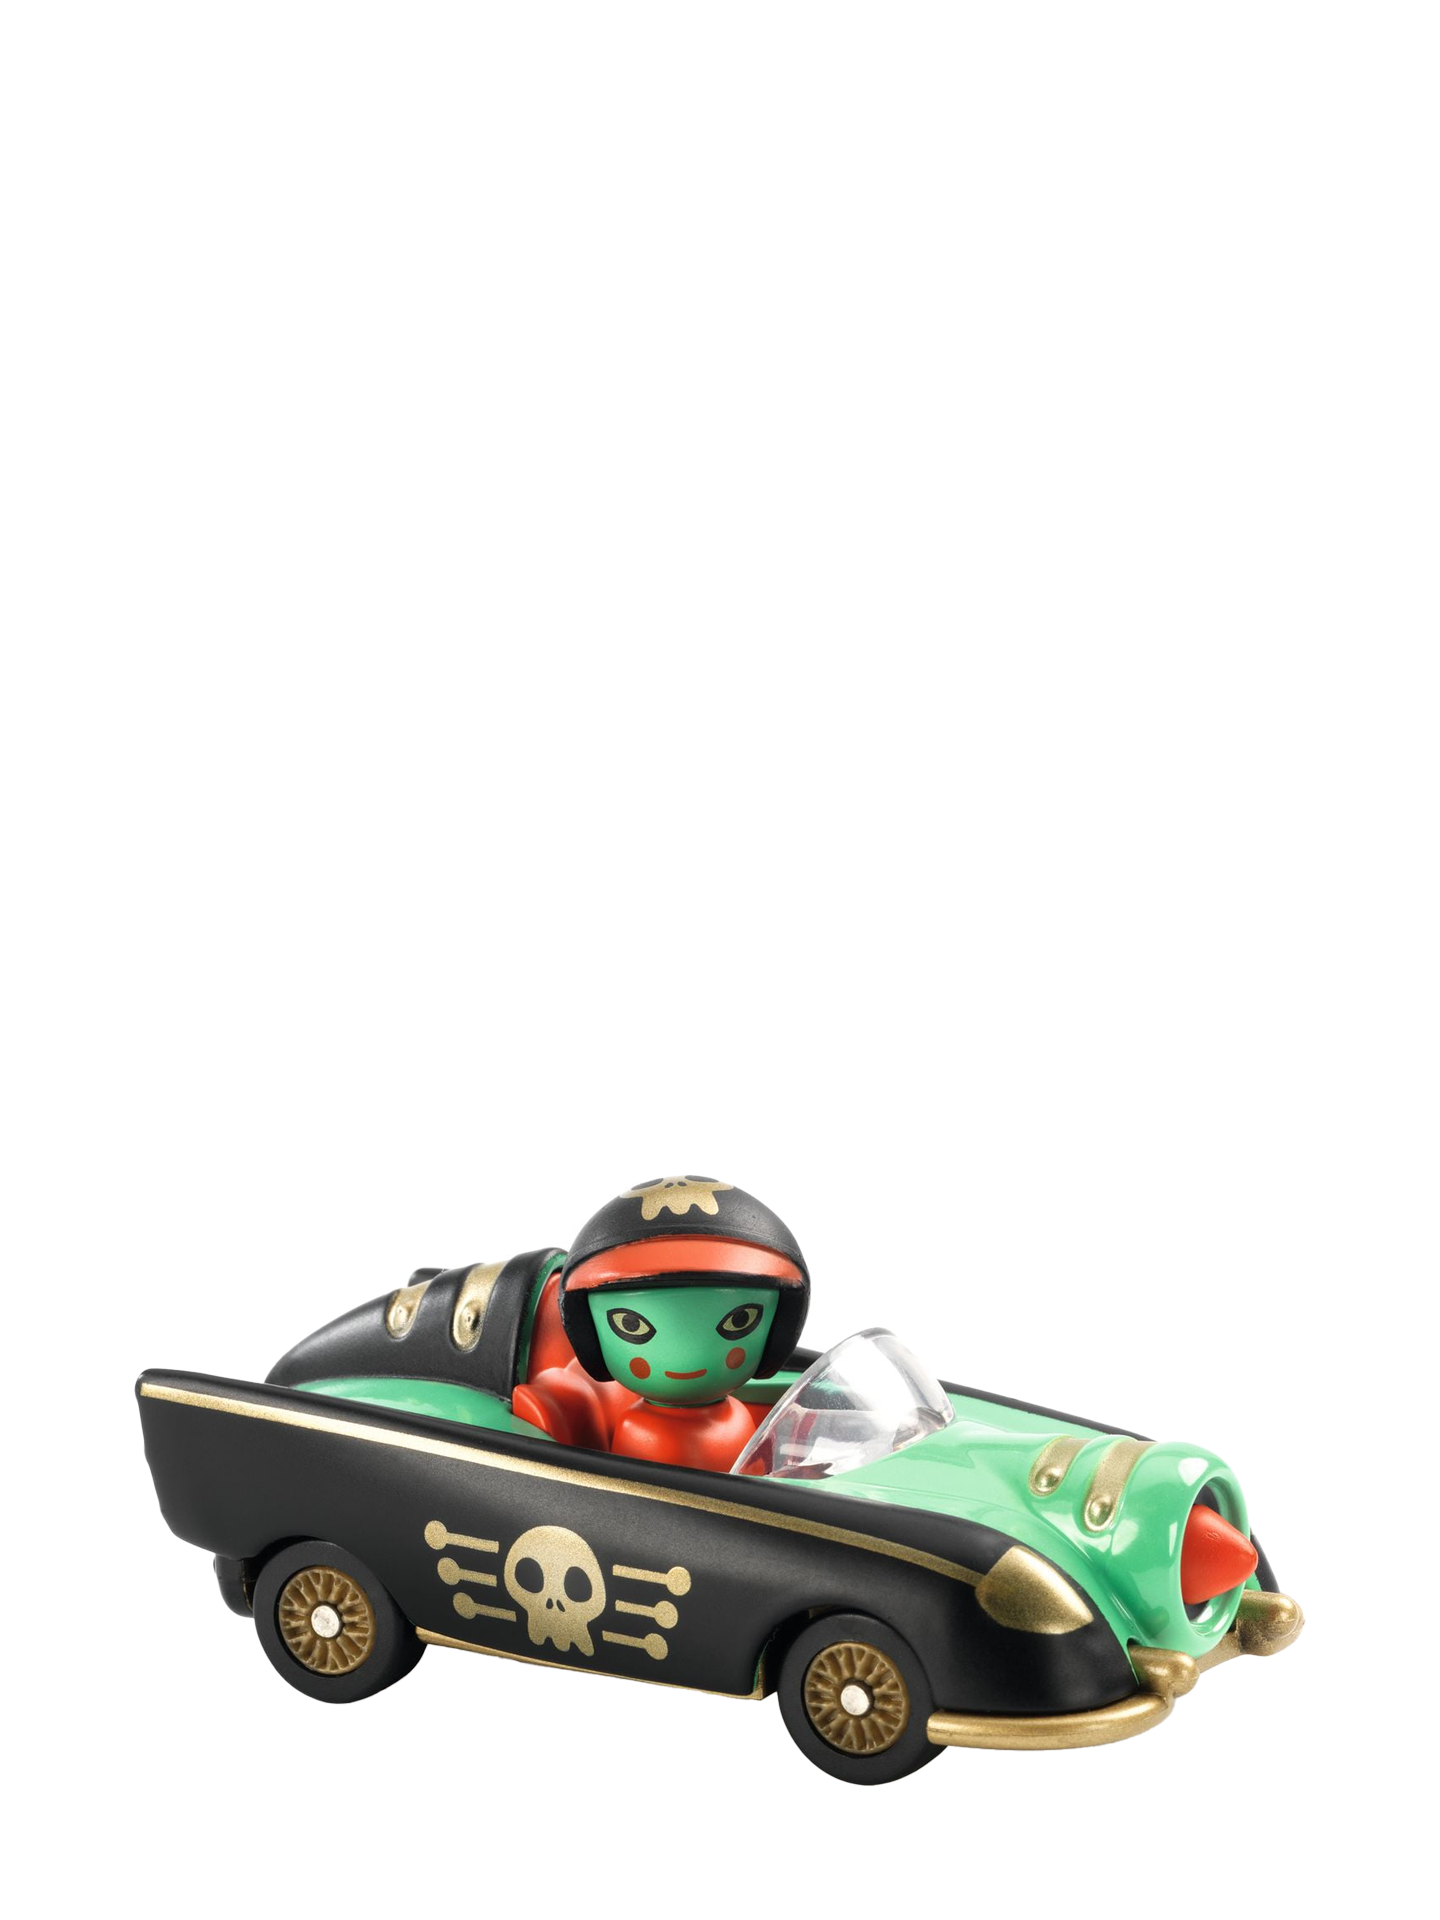 Pirate Wheels car (Crazy motors collection)